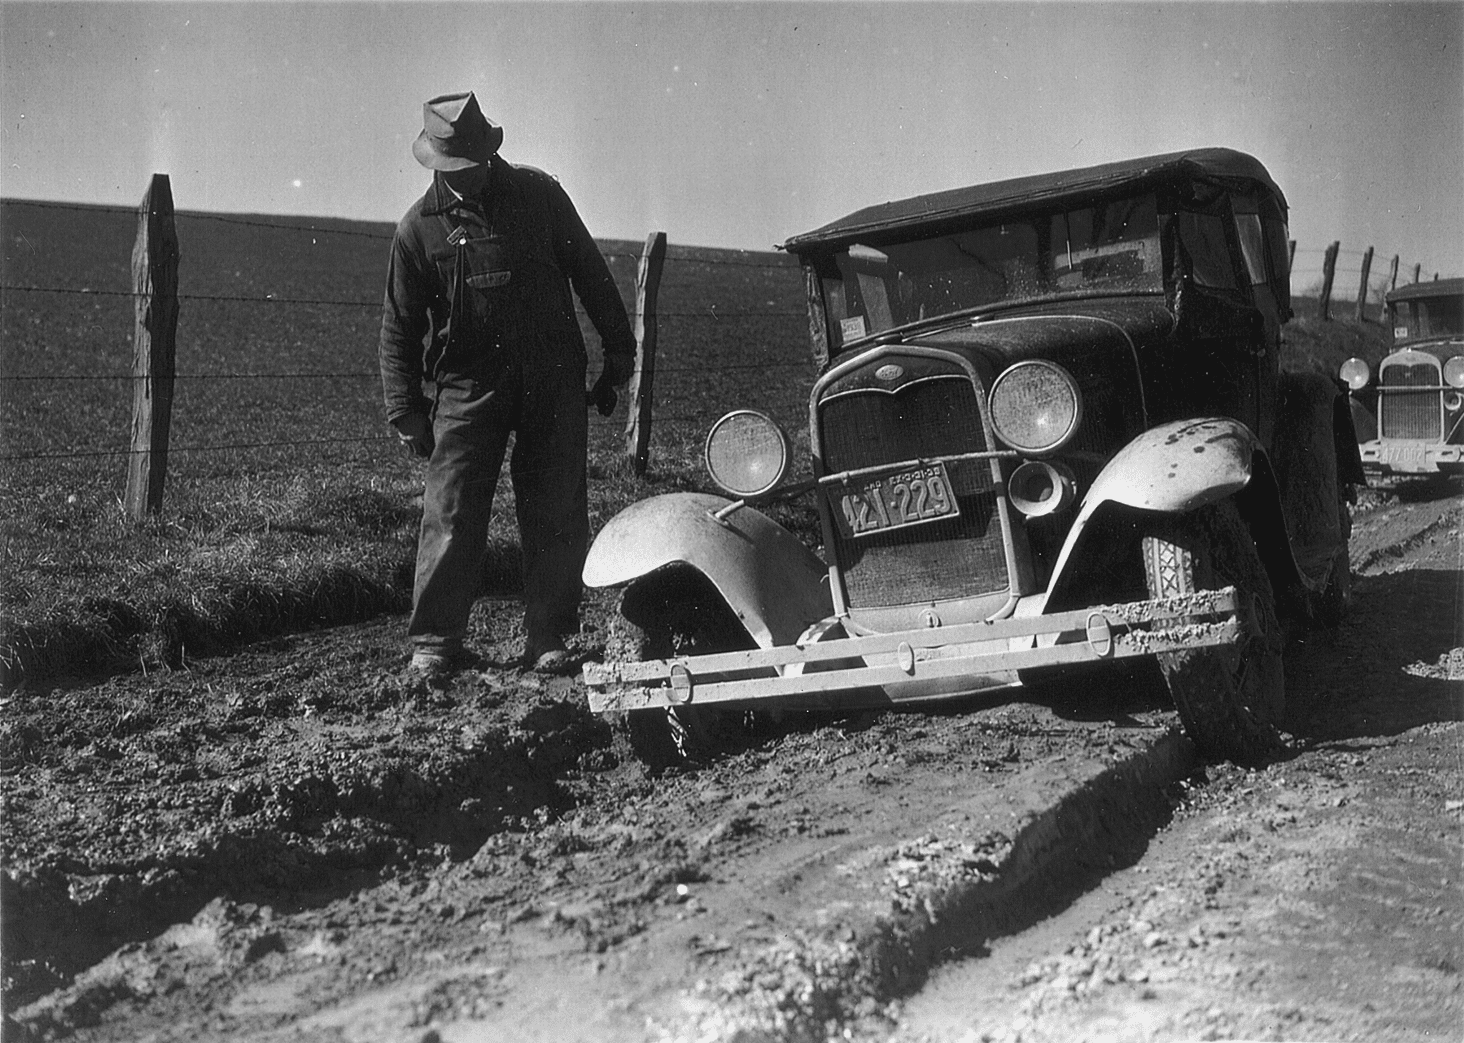 Car in a rut. Courtesy of the National Archive